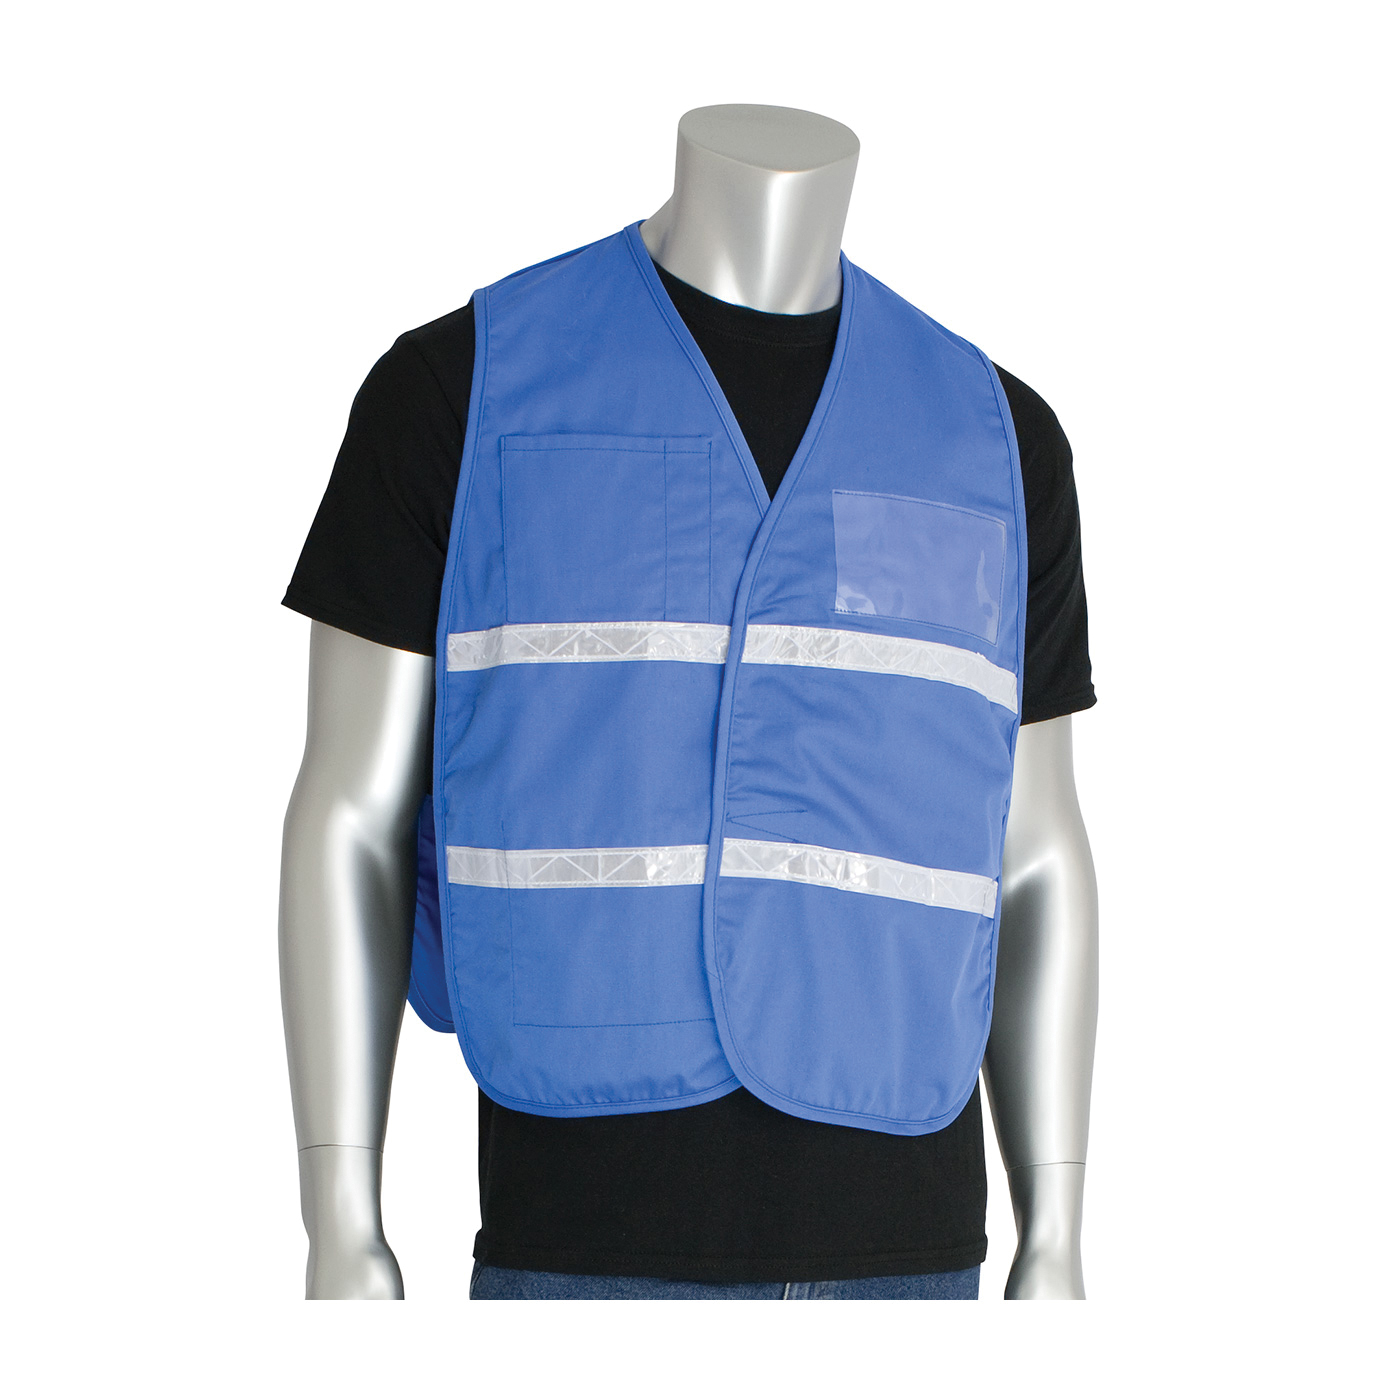 PIP® 300-2509 Non-ANSI Incident Command Vest, Light Blue, 35% Cotton/65% Polyester, Hook and Loop Closure, 4 Pockets